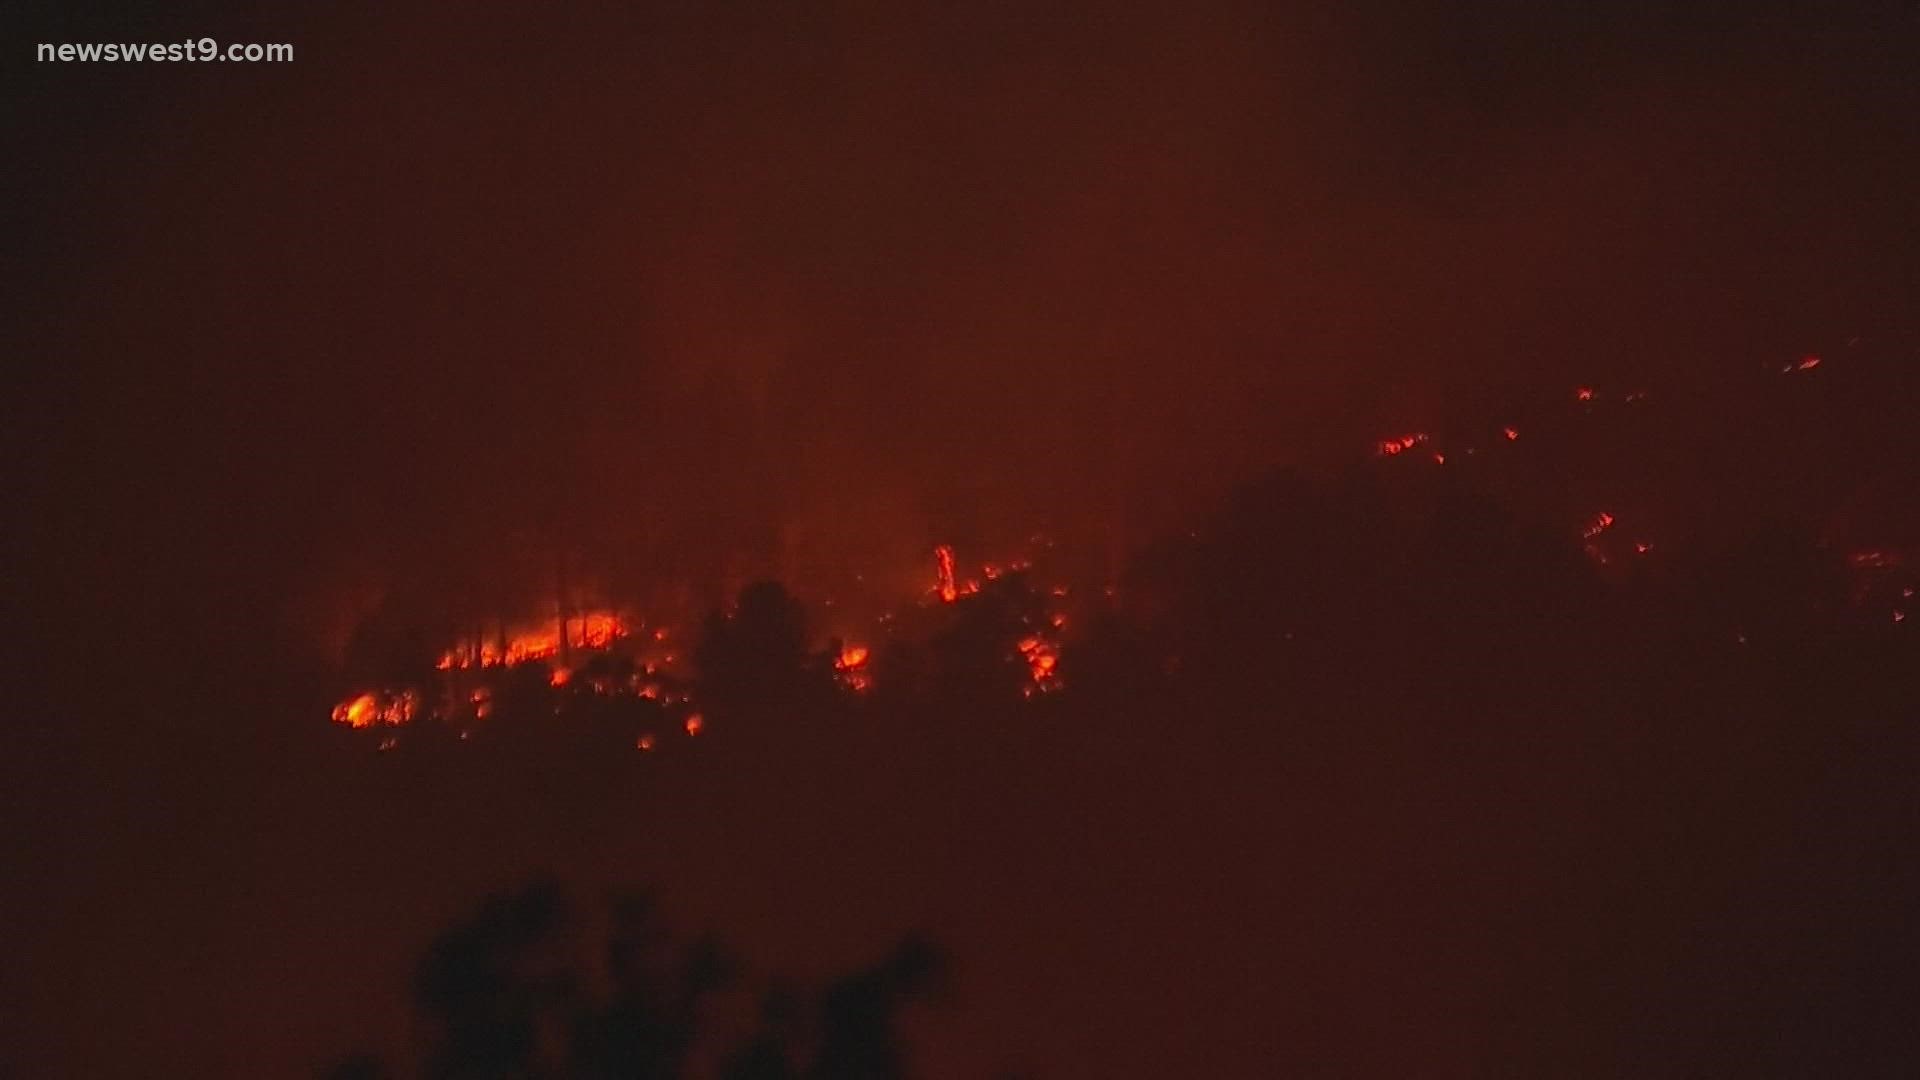 Ruidoso fires lead to evacuation for thousands of people